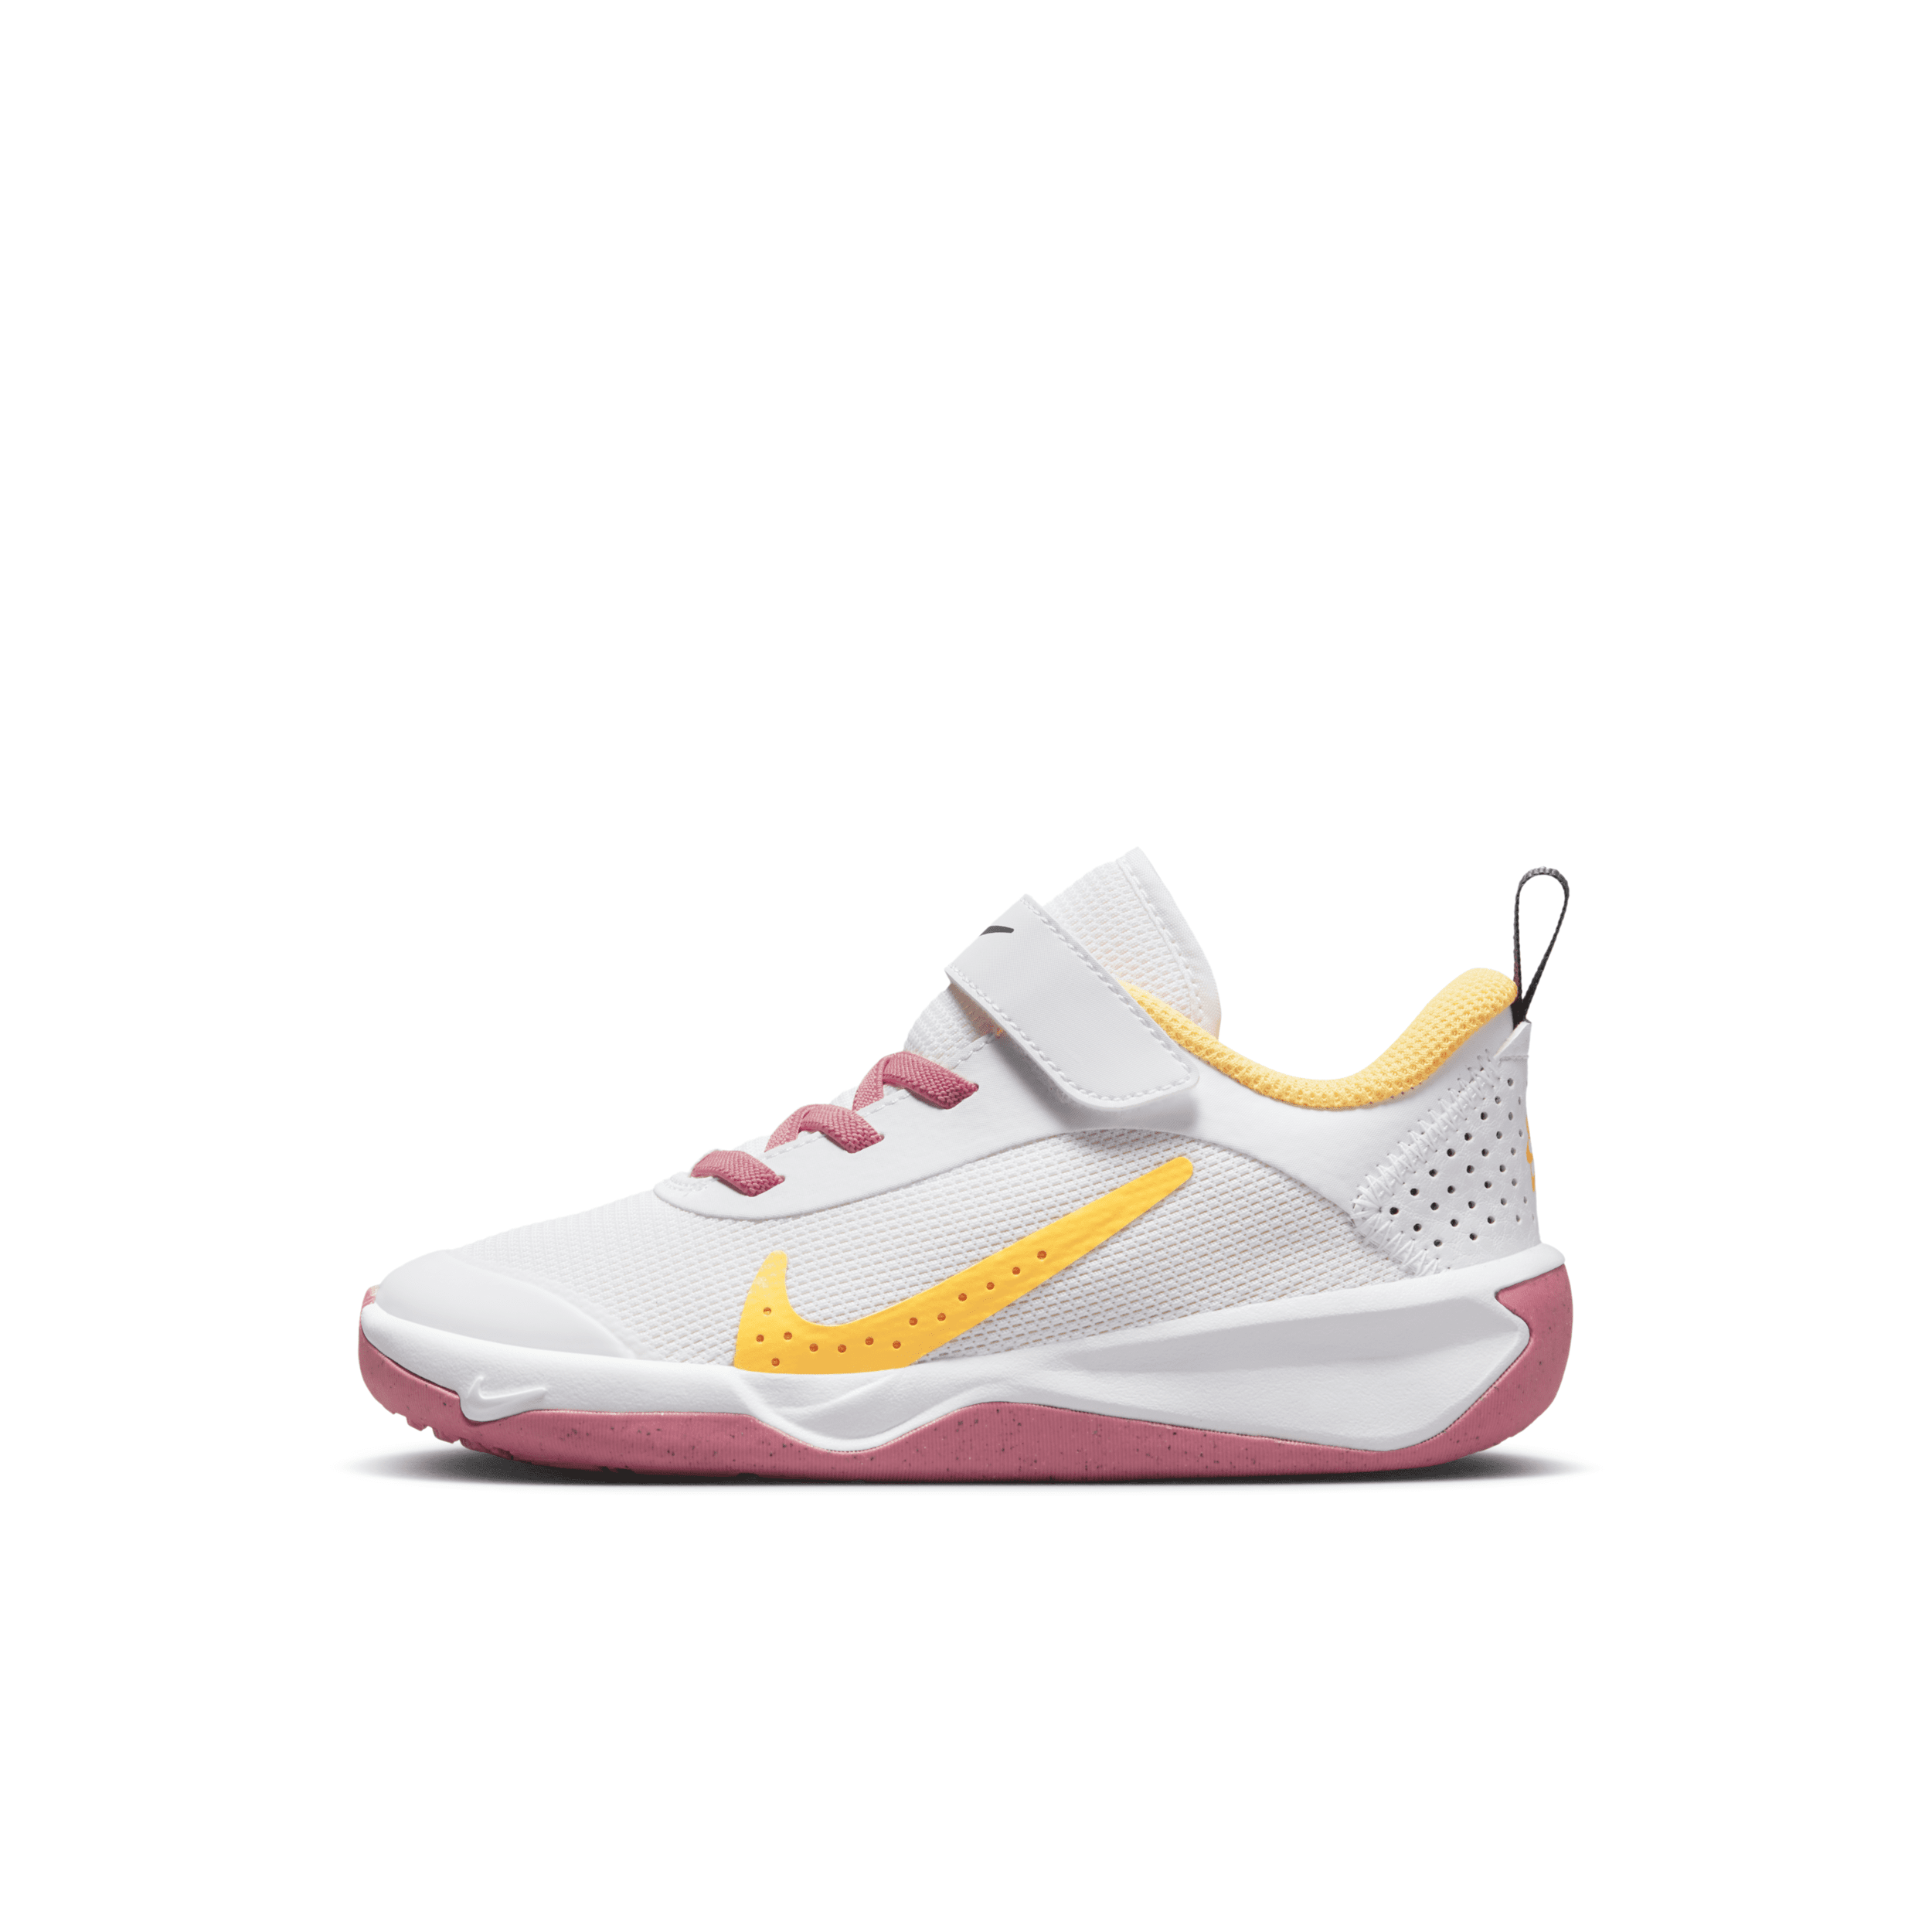 Nike Babies' Omni Multi-court Little Kids' Shoes In White